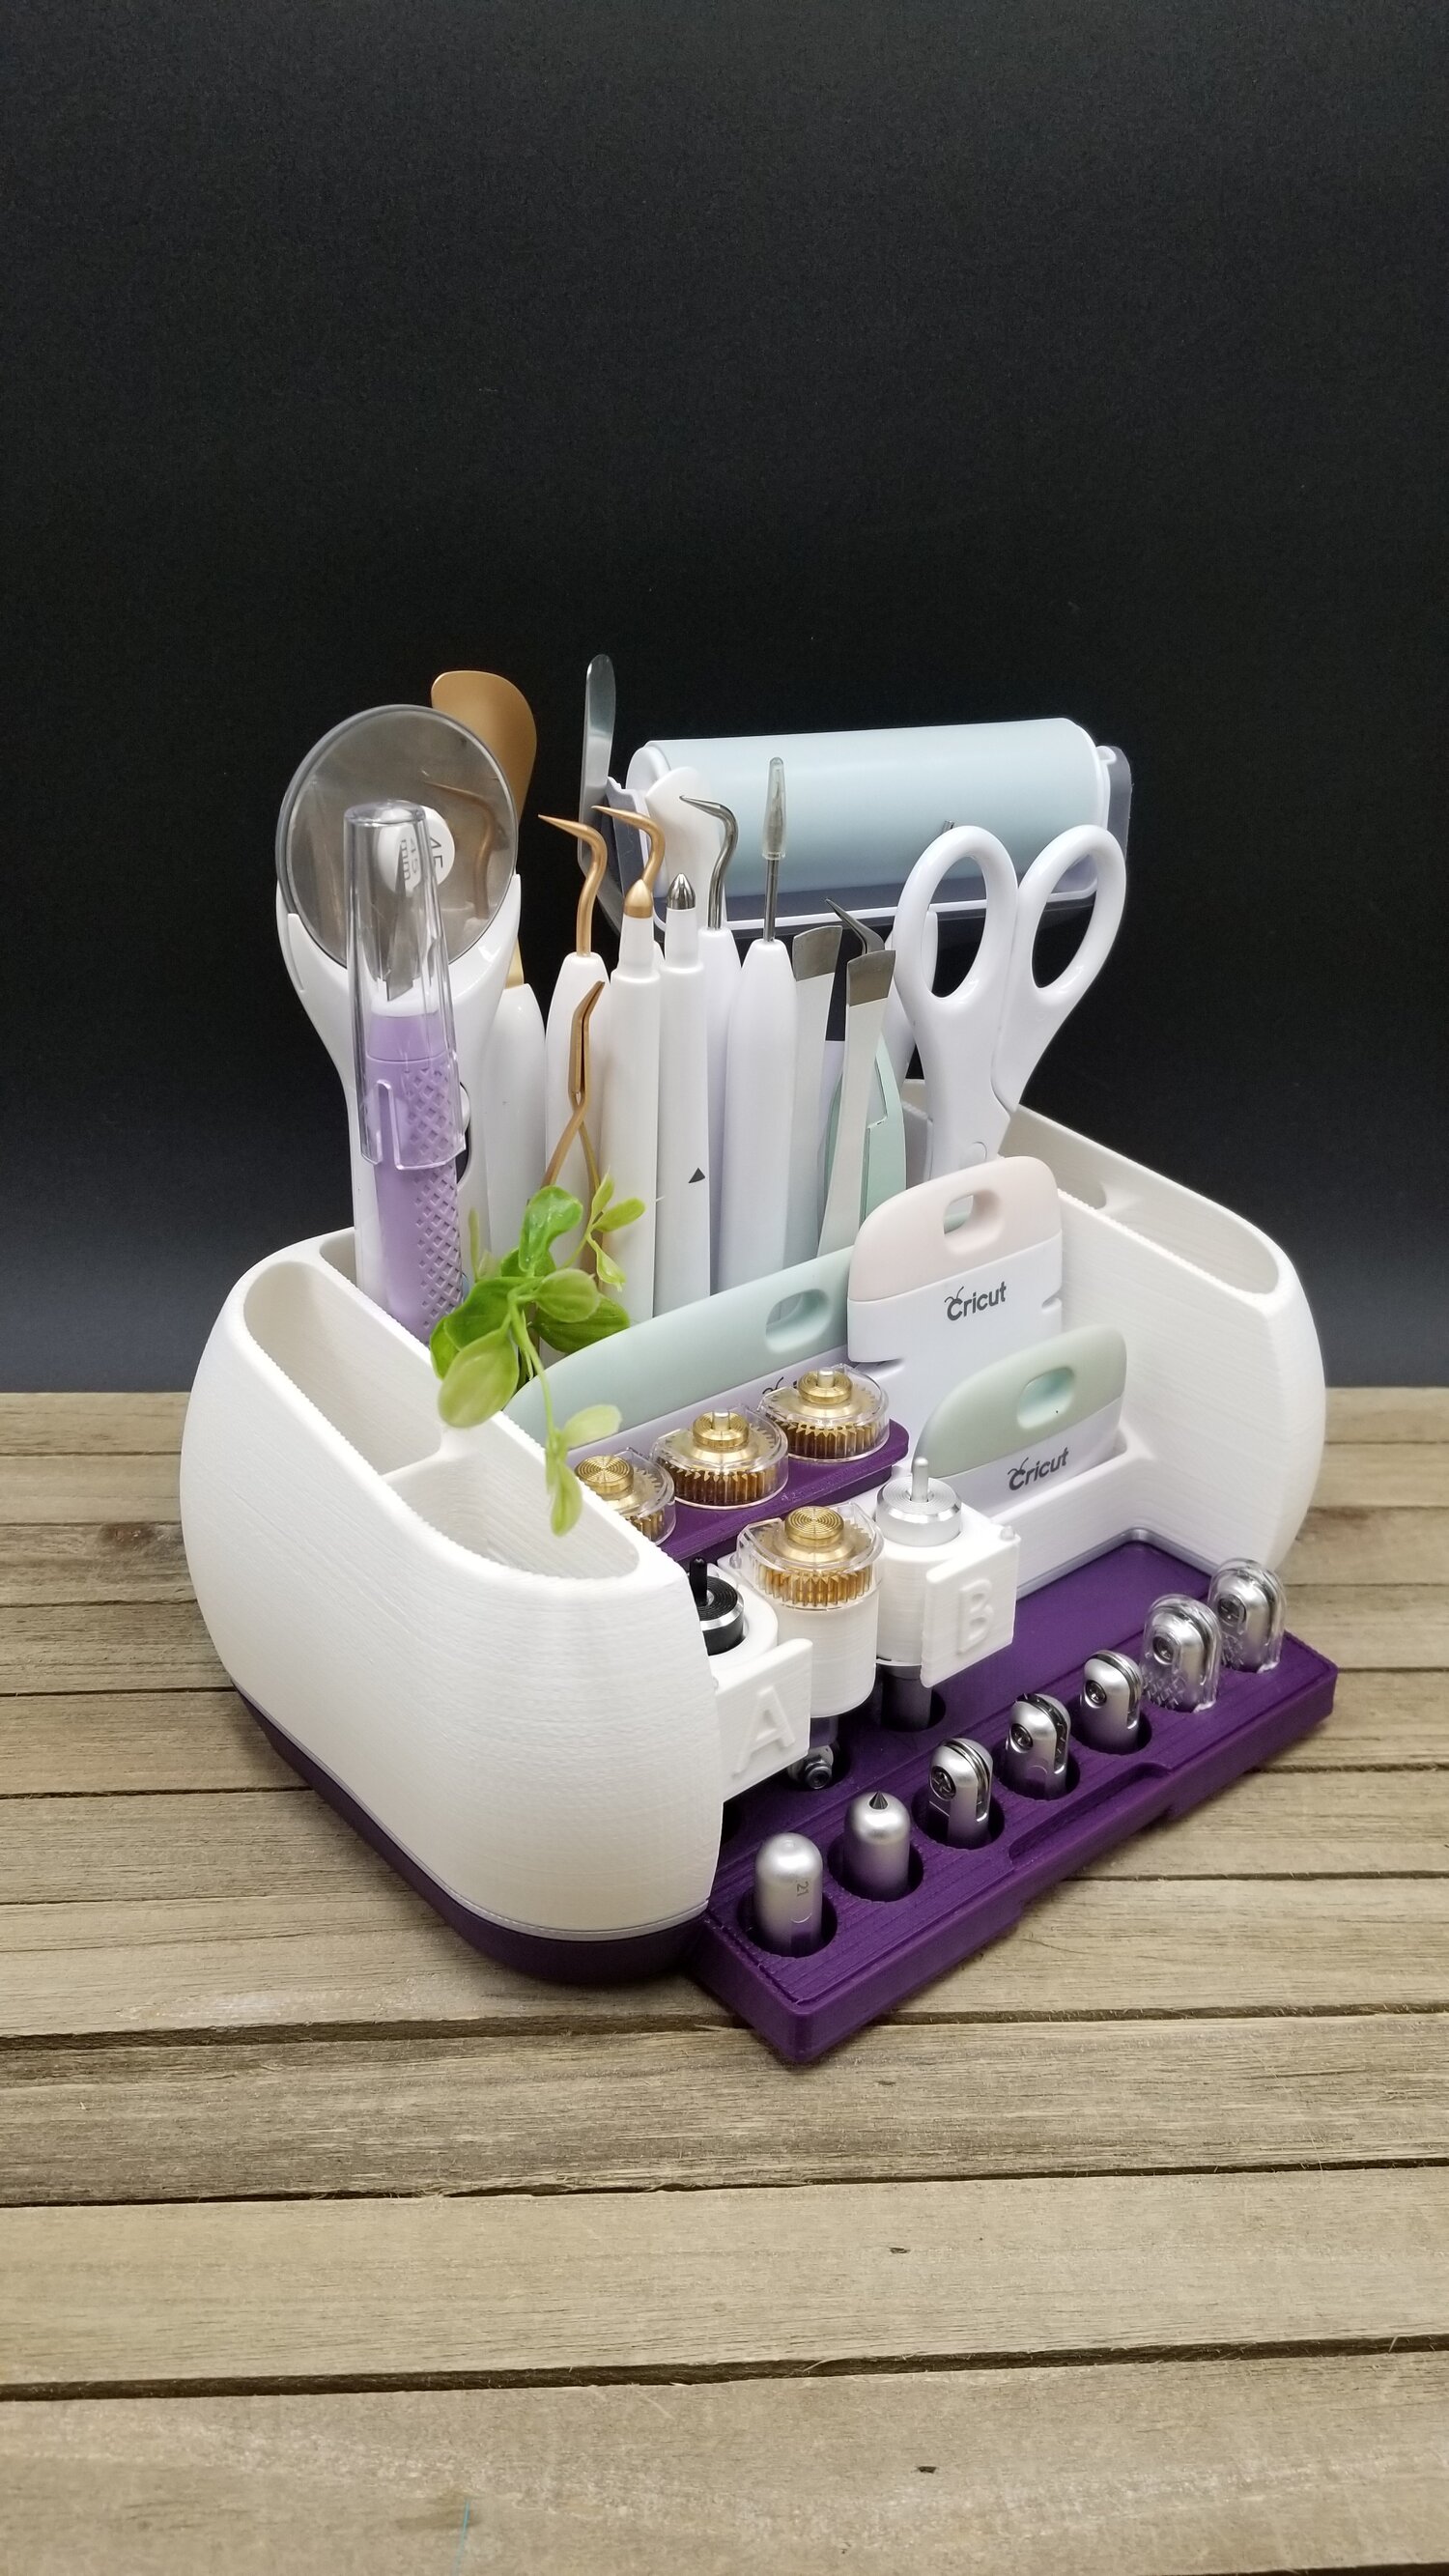 Tool Holder for Cricut Tool and Blades Designed by Jennifer Maker 3D  Printed Cutting Machine Tool Holder -  Norway